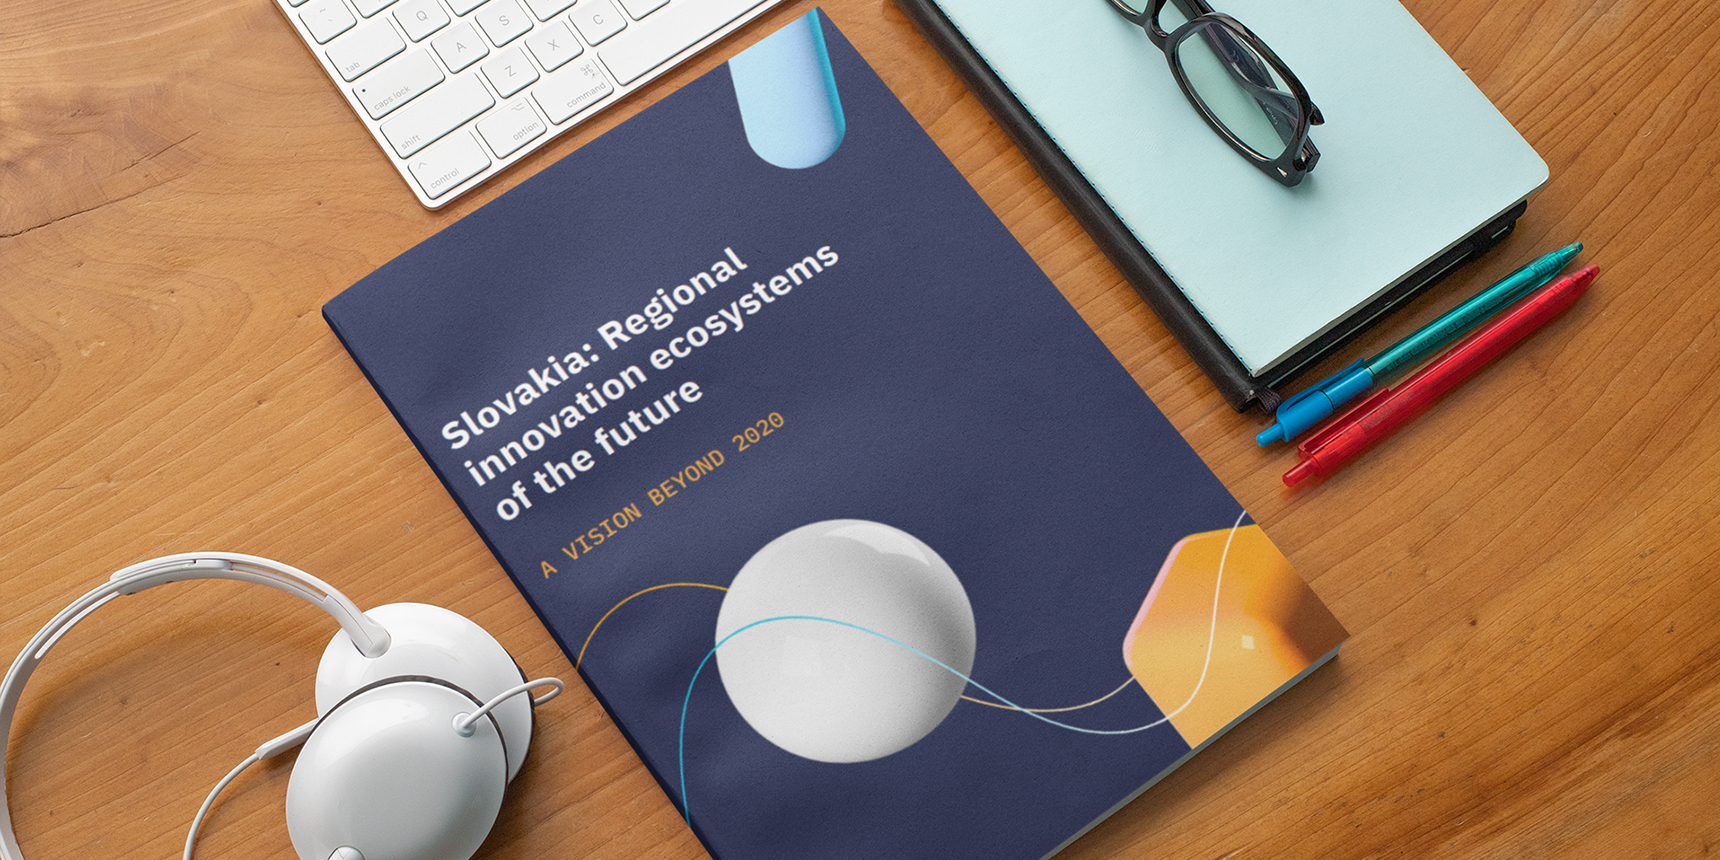 EIT Digital released report on Slovak innovation ecosystems of the future